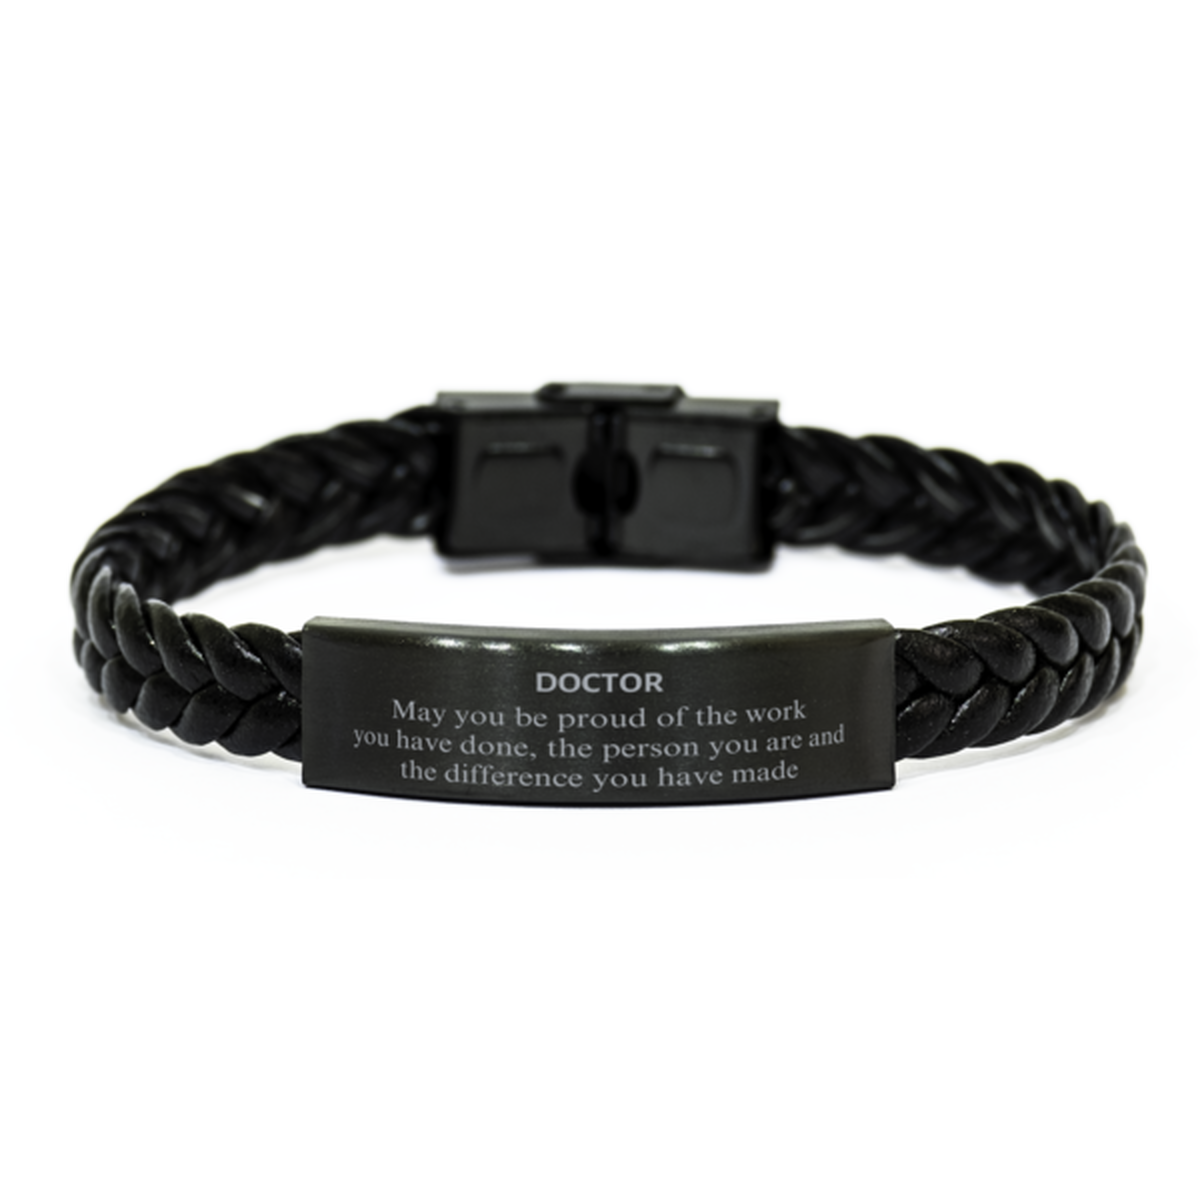 Doctor May you be proud of the work you have done, Retirement Doctor Braided Leather Bracelet for Colleague Appreciation Gifts Amazing for Doctor